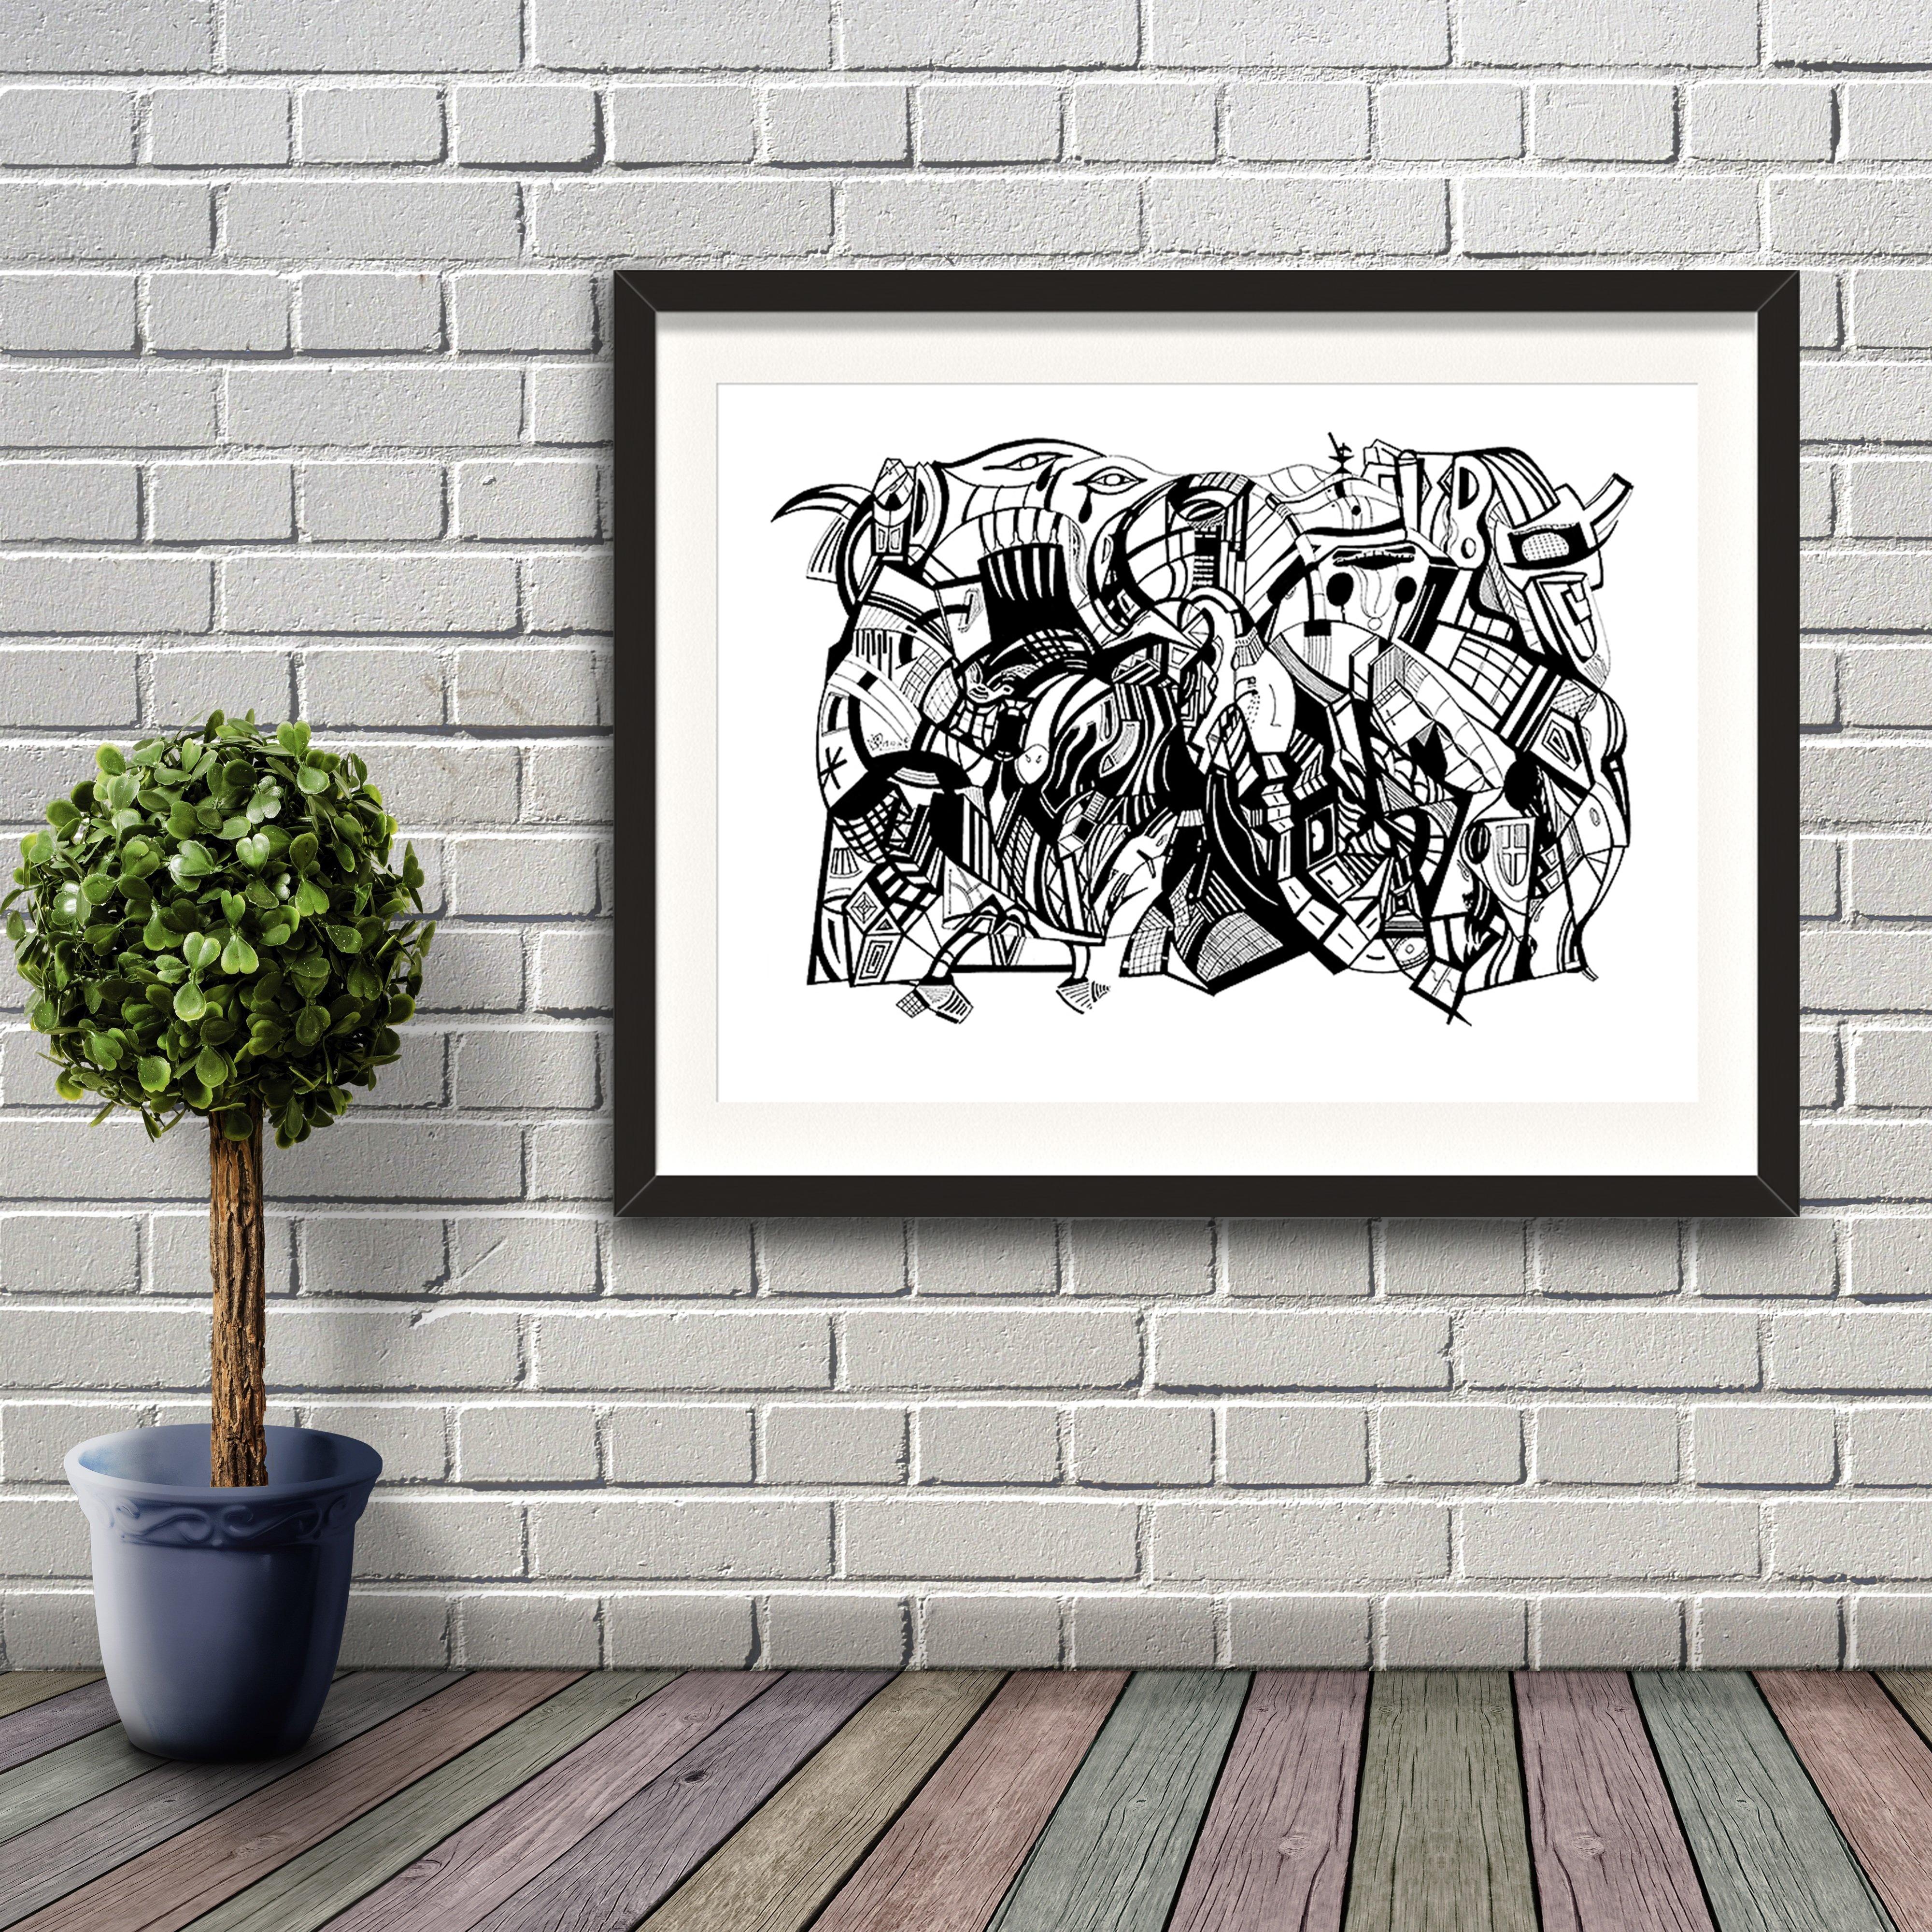 A fine art print from Jason clarke titled Teardrops drawn with a black Pentel pen. Artwork shown in a black frame hanging on a brick wall.